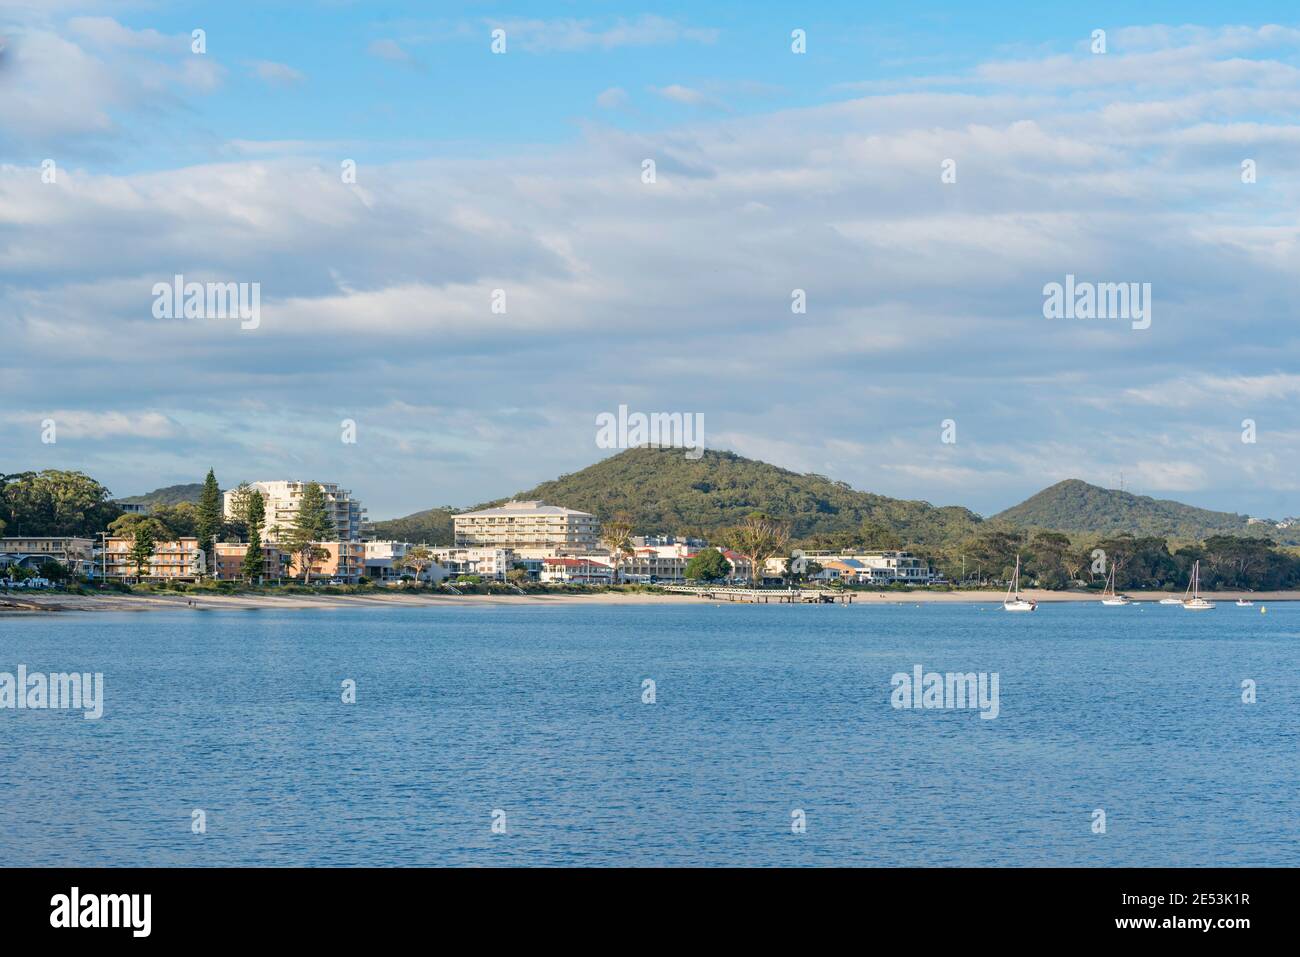 Looking southwest towards the town of Shoal Bay from Tomaree Head at the entrance to Port Stephens, New South Wales, Australia Stock Photo